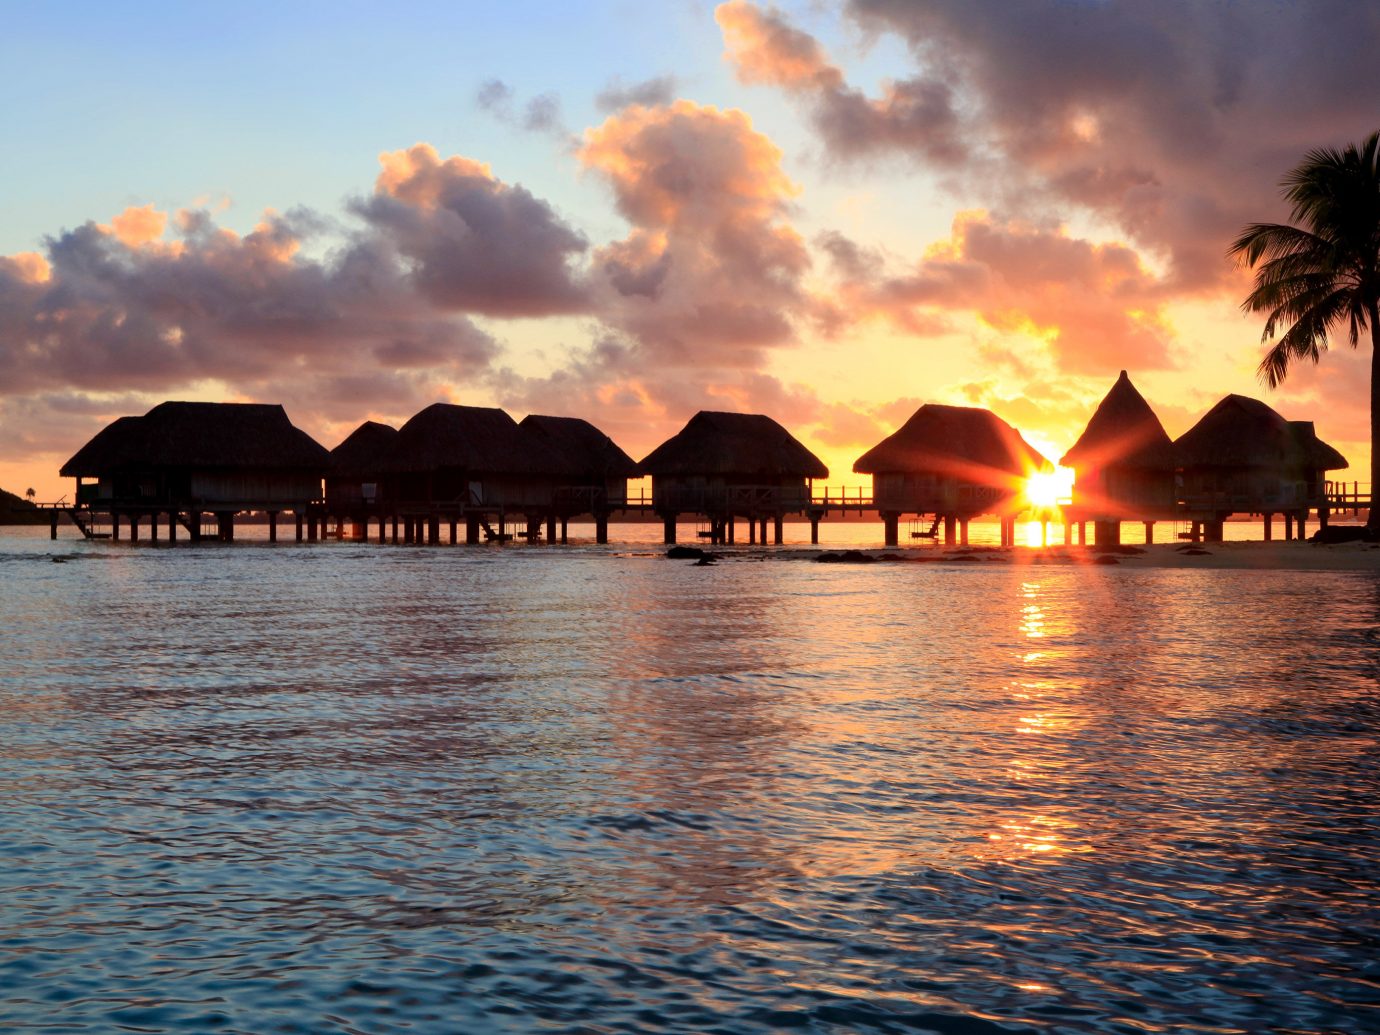 Architecture Buildings Hotels Overwater Bungalow Resort Scenic views Sunset water outdoor sky Sea horizon Ocean dusk Coast sunrise evening Beach bay dawn reflection sunlight cape clouds shore day